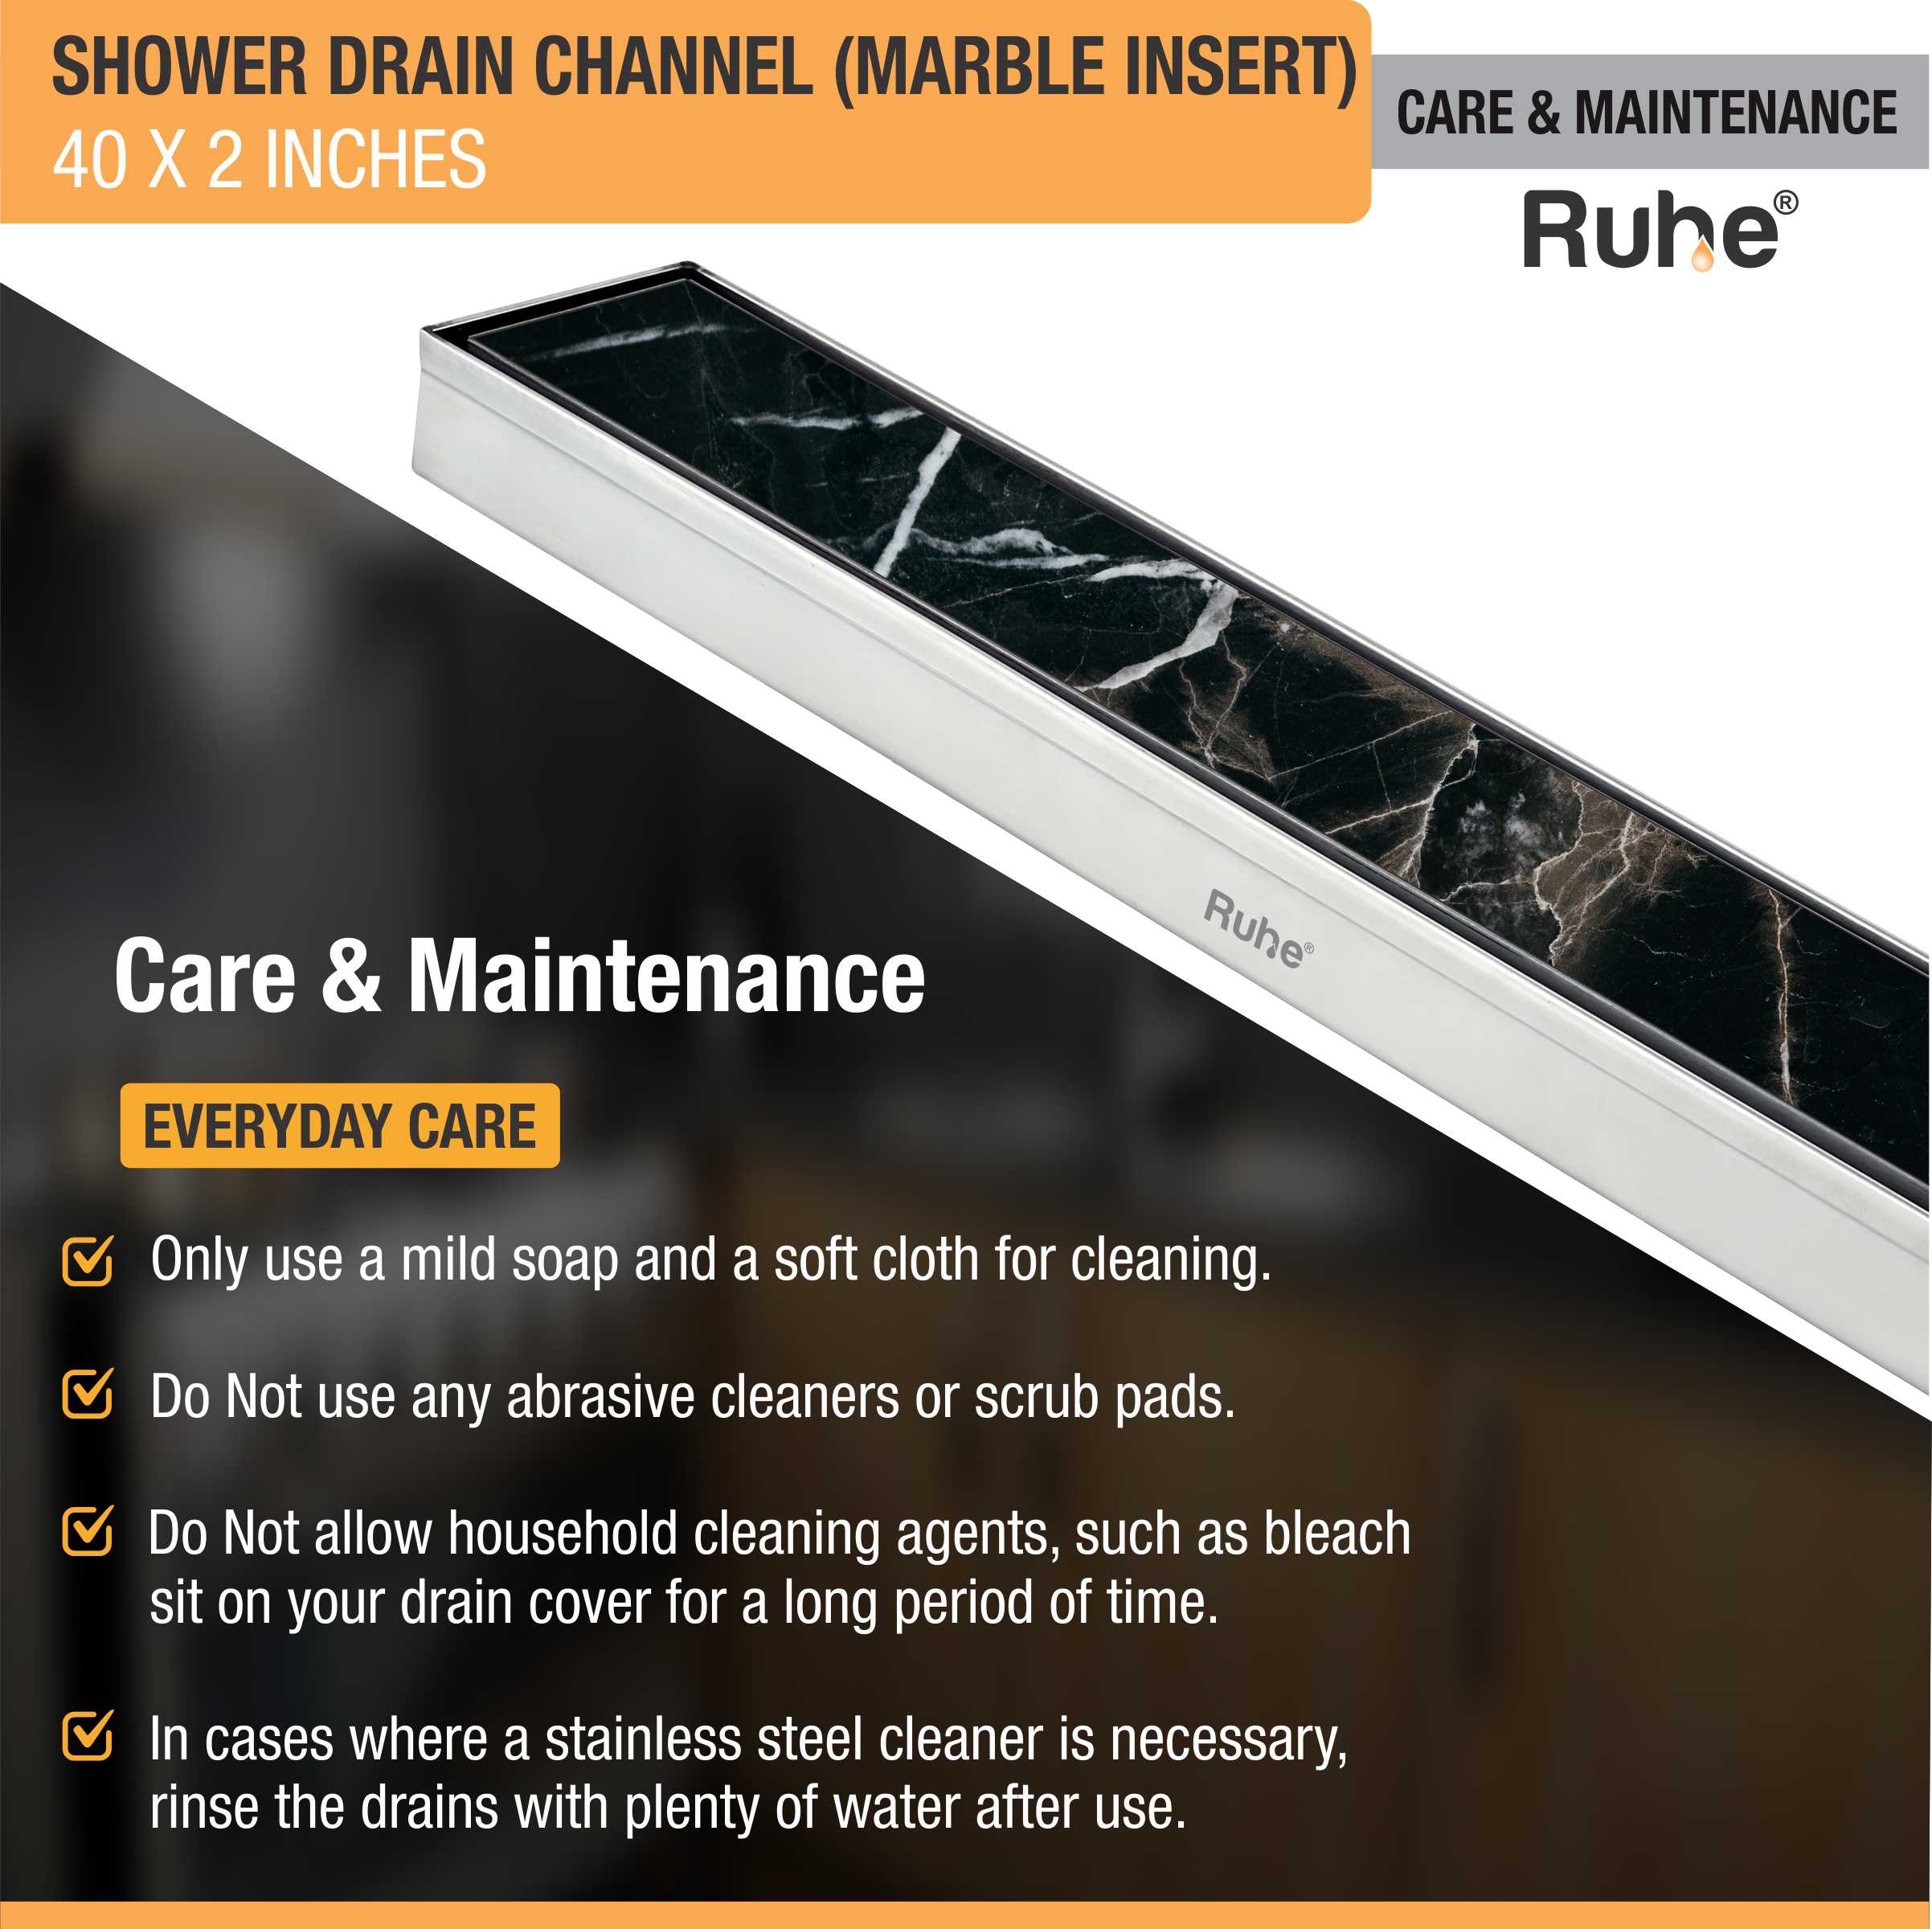 Marble Insert Shower Drain Channel (40 x 2 Inches) (304 Grade) care and maintenance